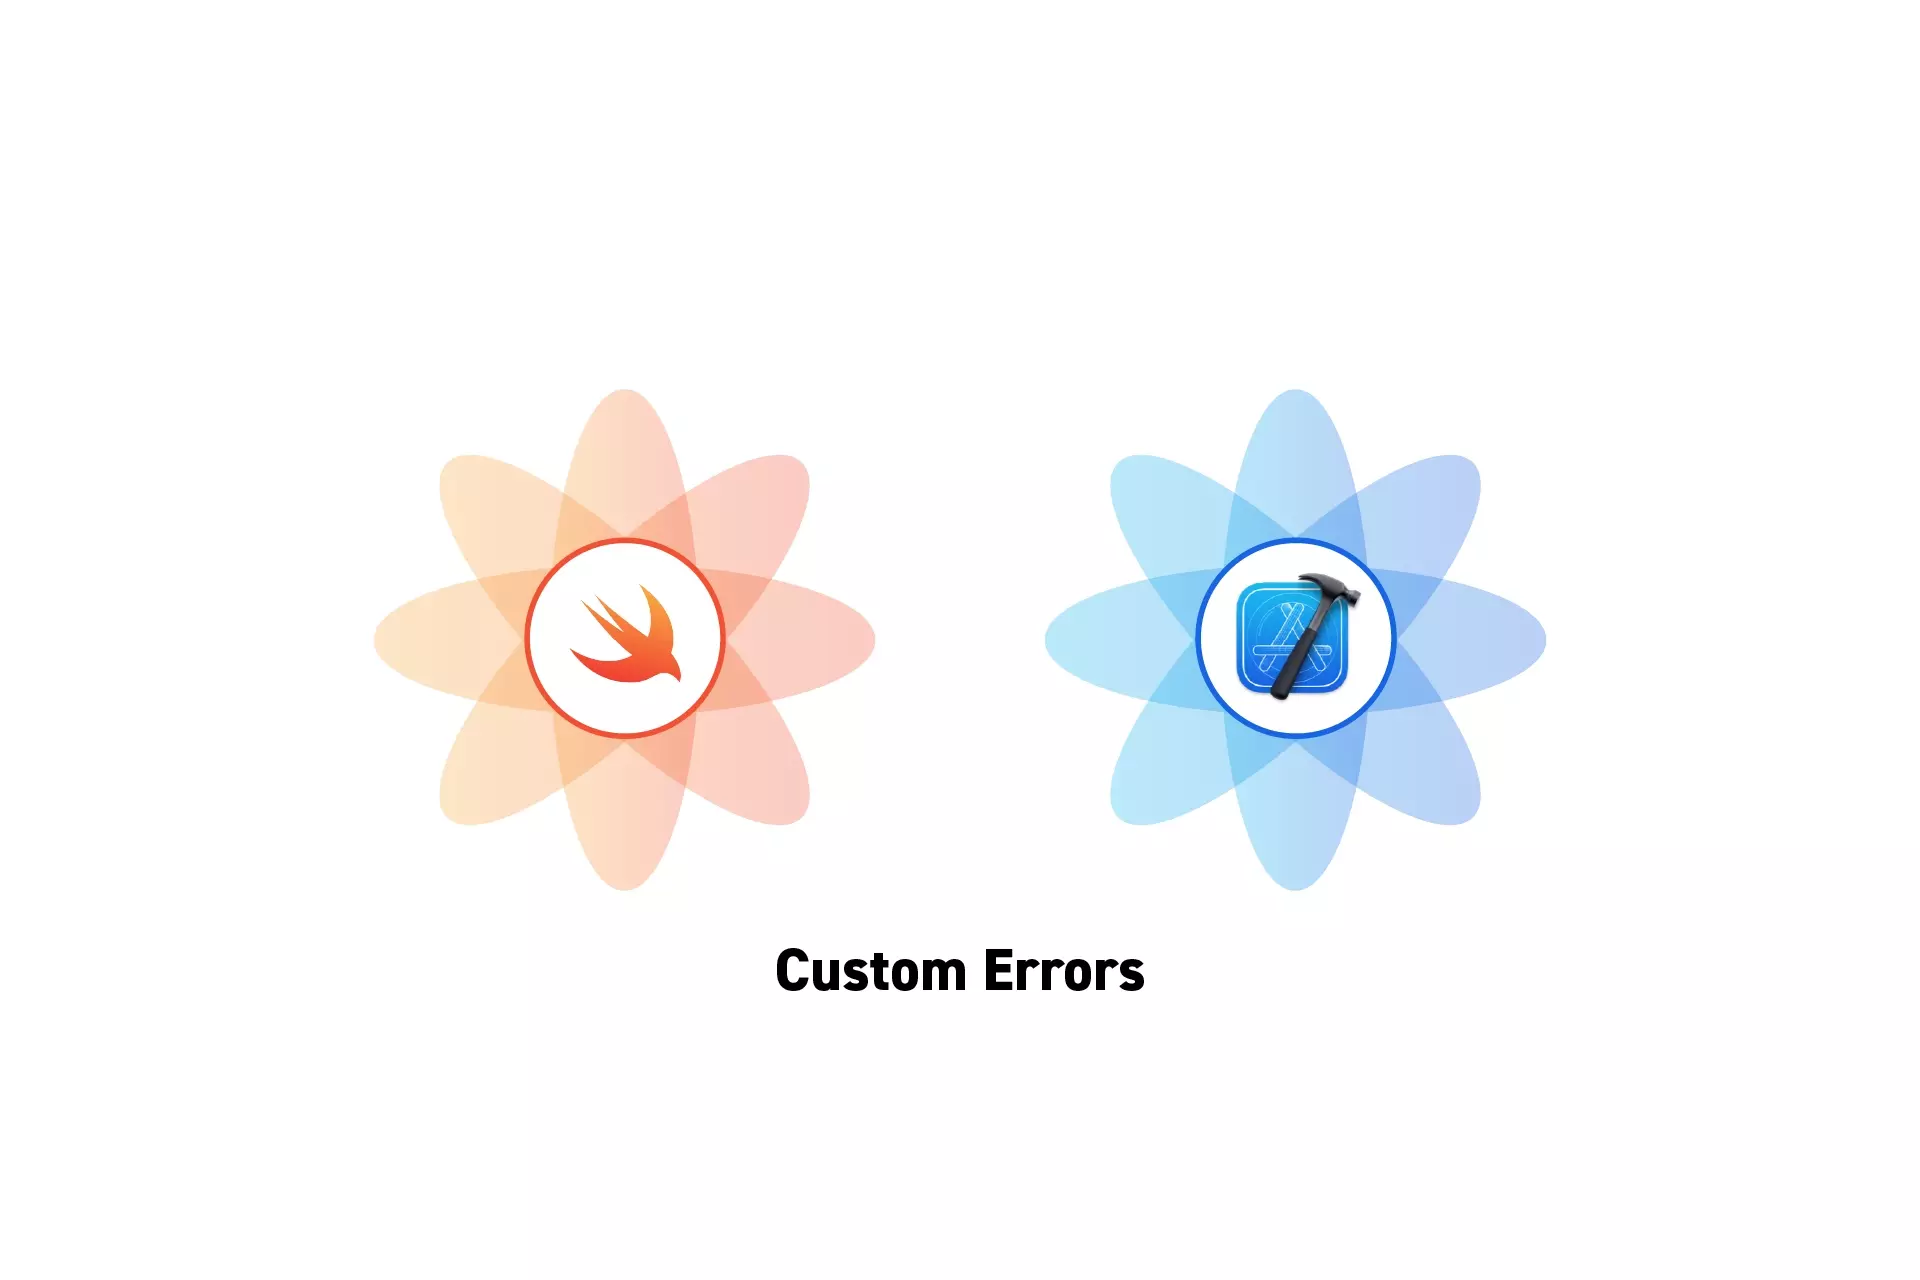 Two flowers that represent Swift and XCode side by side. Beneath them sits the text "Custom Errors."